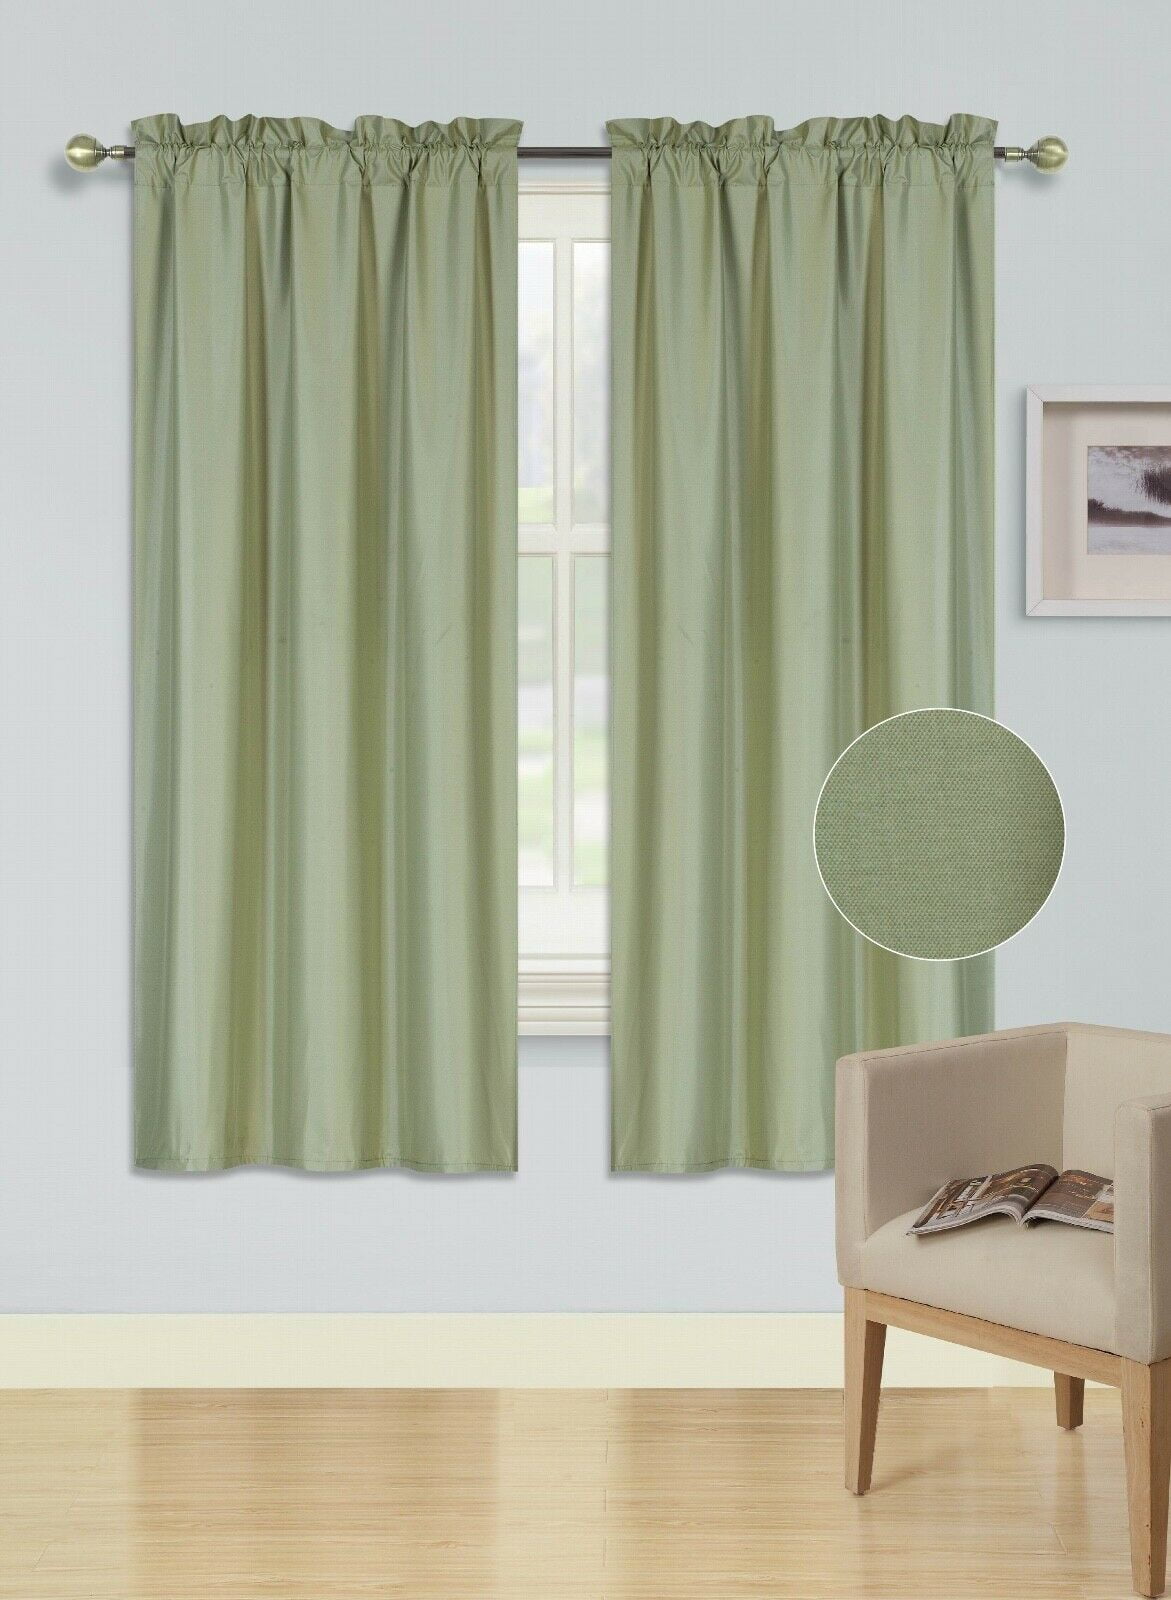 ROD POCKET TOP PANEL SOLID BLACKOUT FOAM LINED WINDOW CURTAIN SAGE 1PC R64 